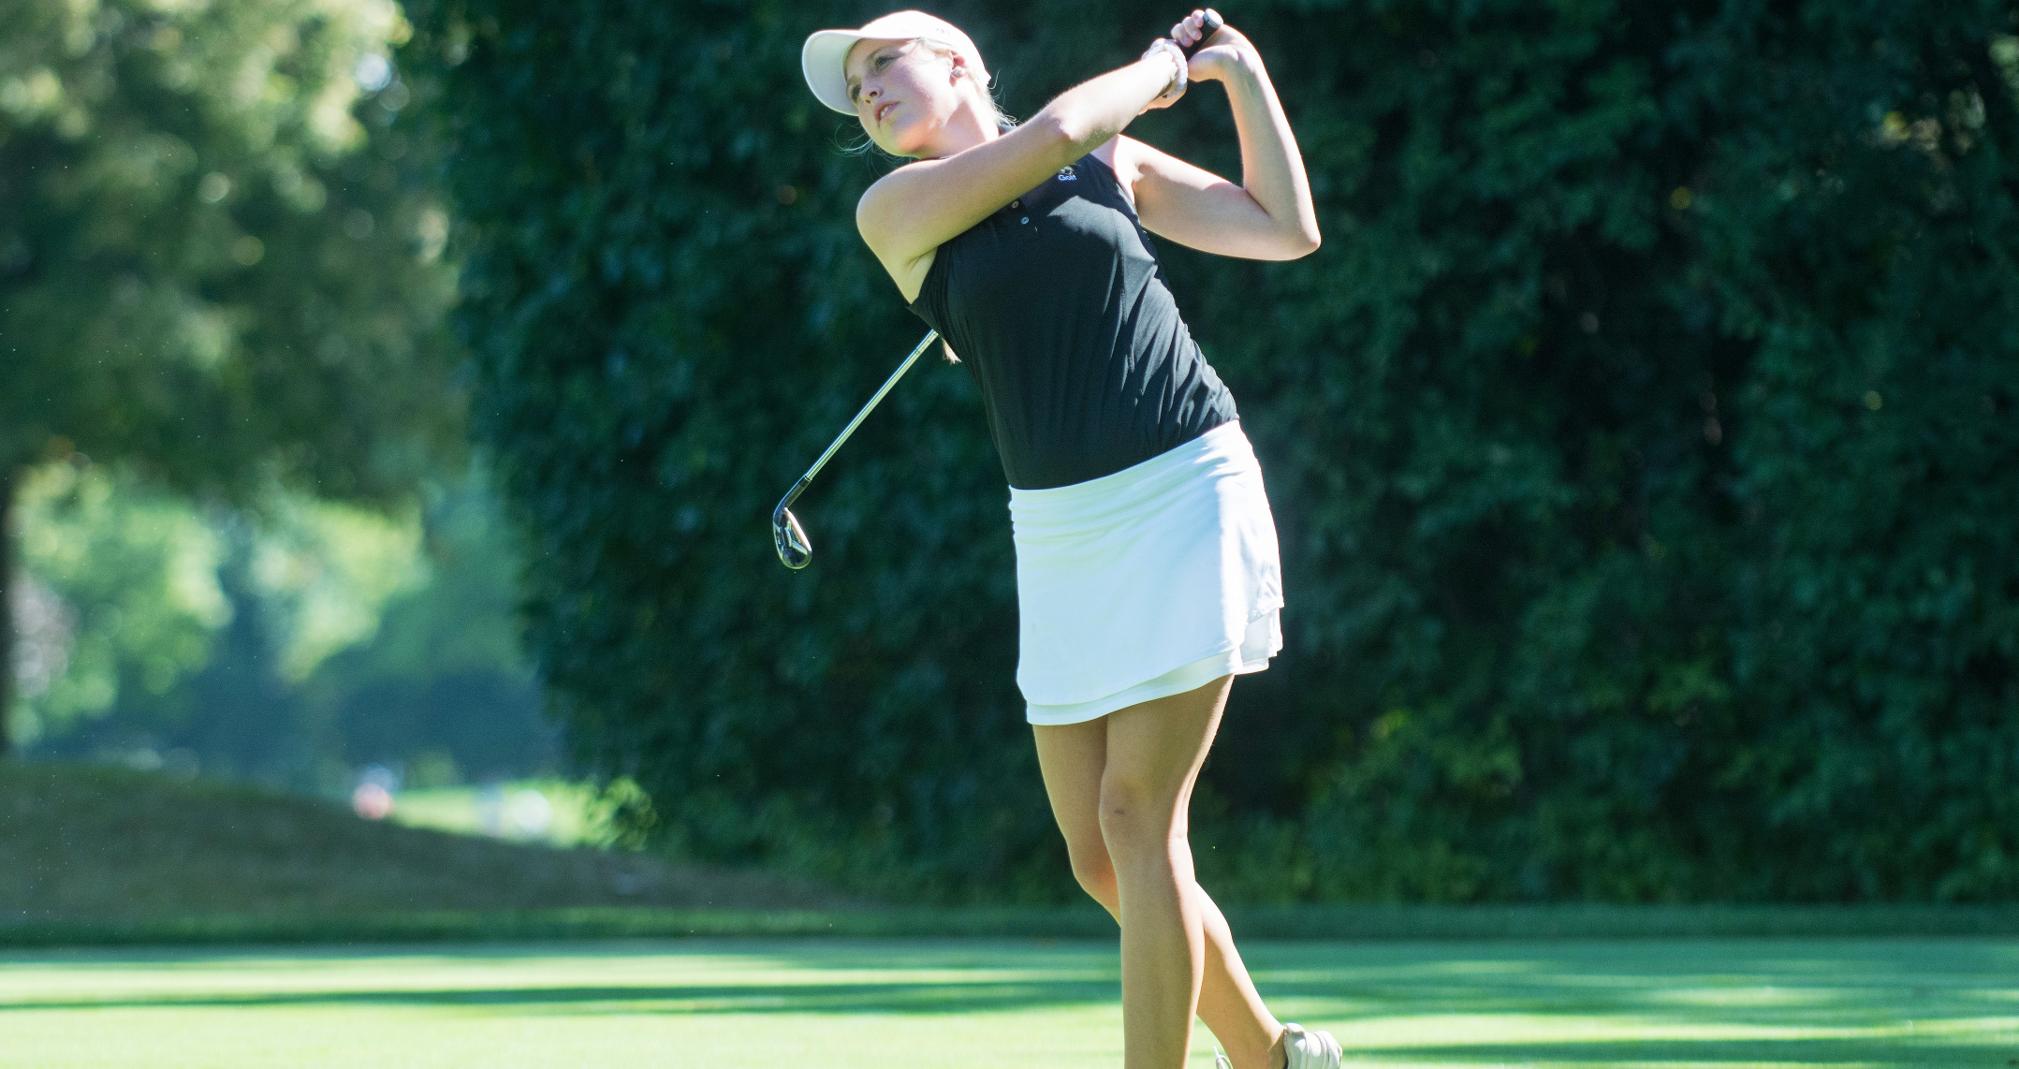 Hanna Rebholz placed 13th among 63 golfers to help the Titans finish second in the team standings.